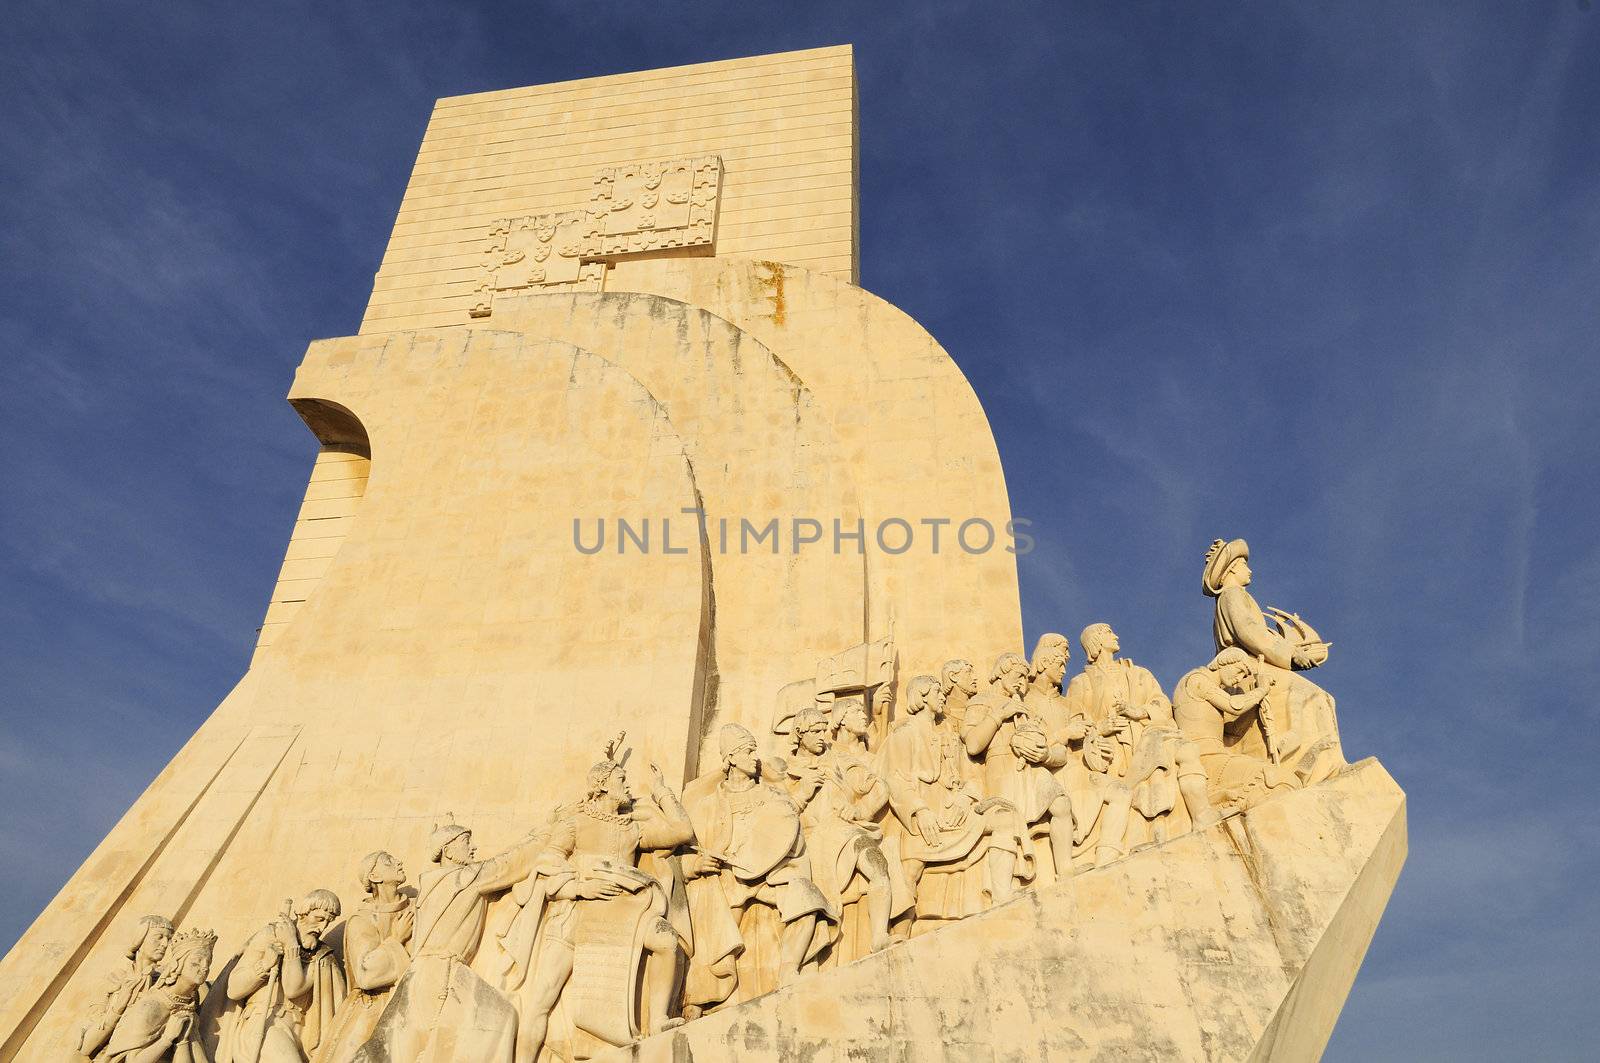 The Padrao dos Descobrimentos (Monument to the Discoveries) celebrates the Portuguese who took part in the Age of Discovery. It is located in the Belem district of Lisbon, Portugal